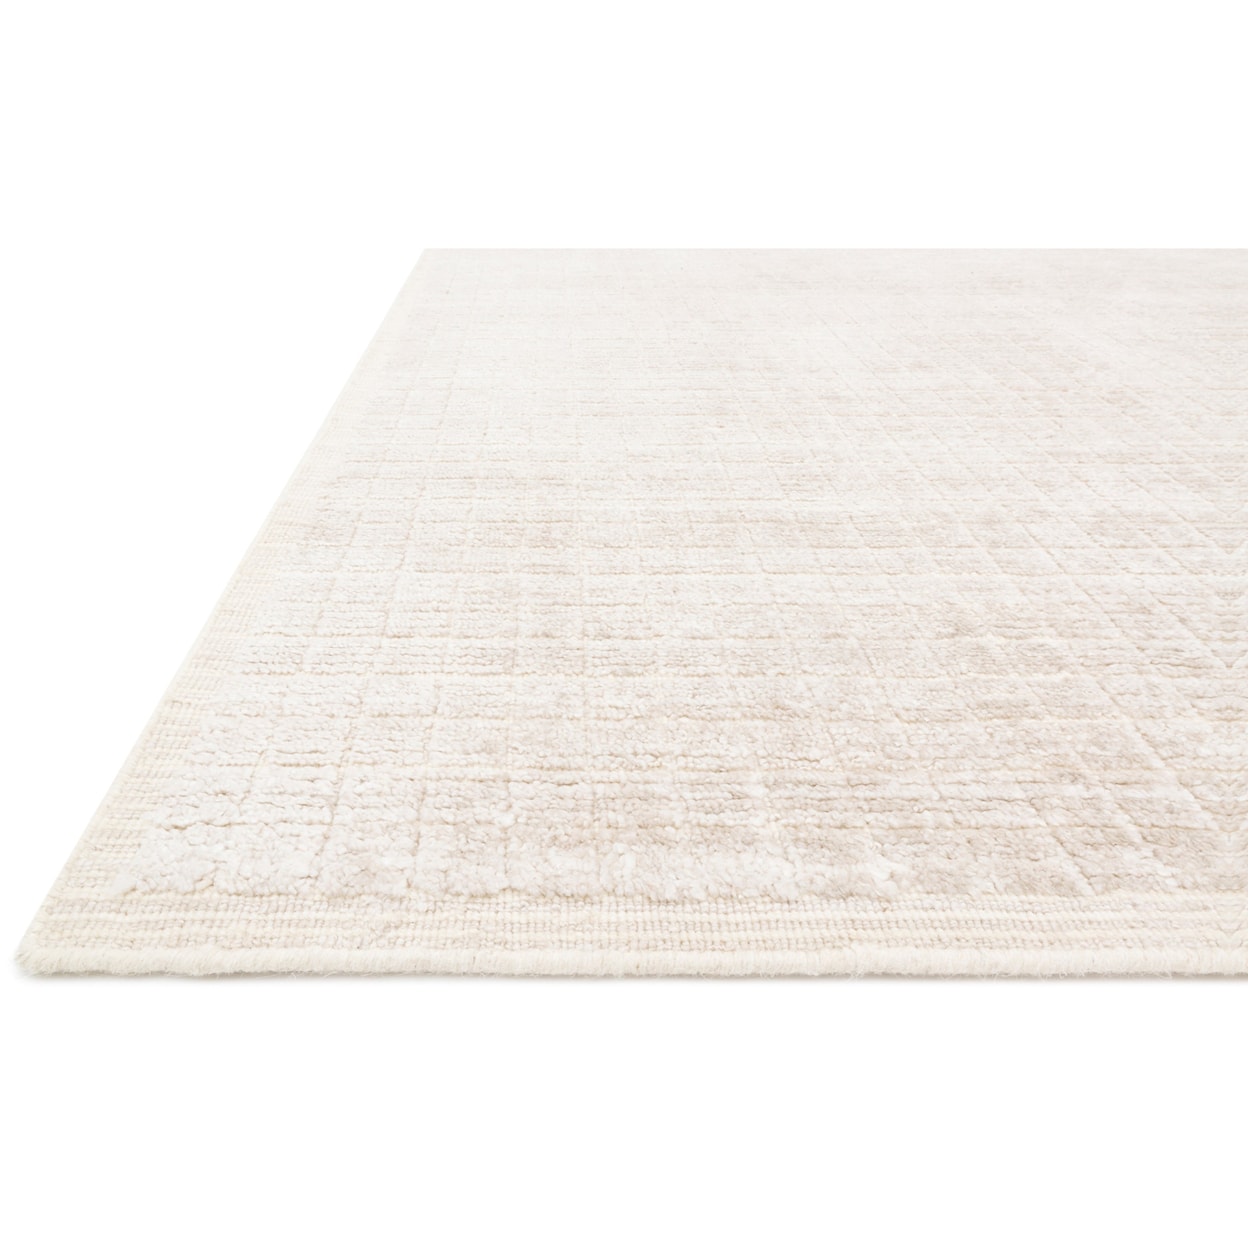 Reeds Rugs Beverly 7'9" x 9'9" Natural Rug